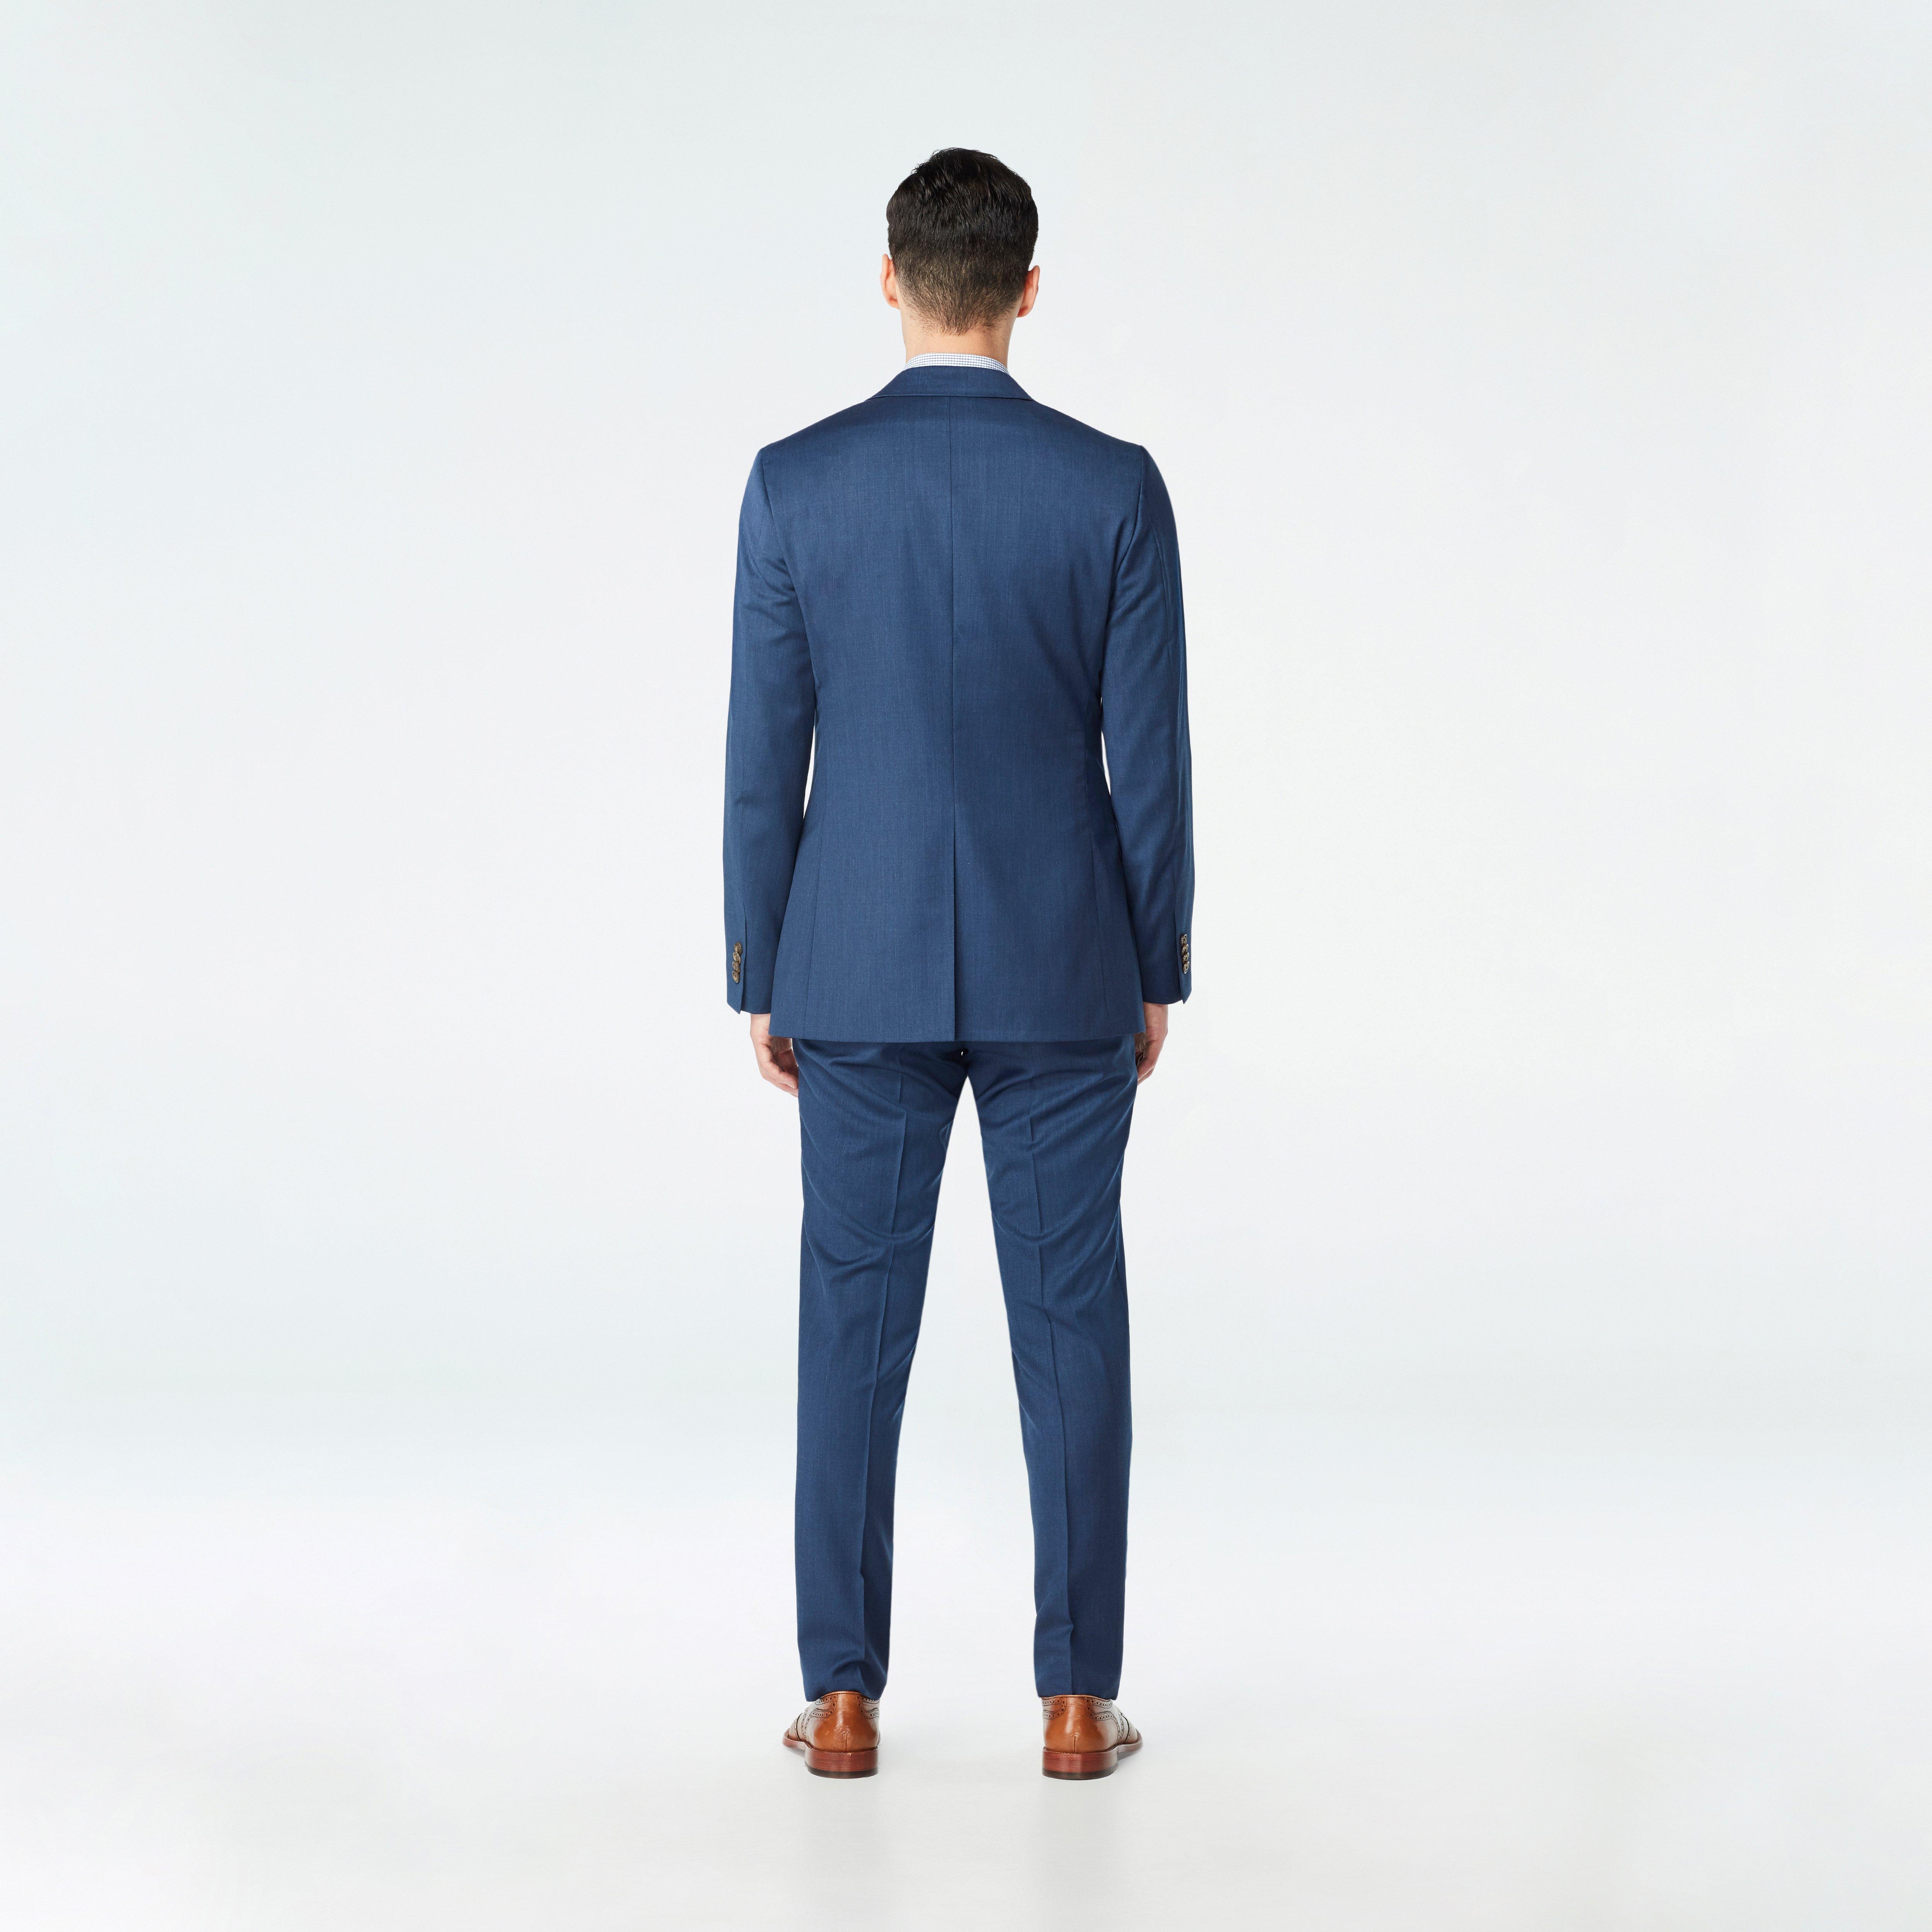 Custom Suits Made For You - Hemsworth Deep Blue Suit | INDOCHINO